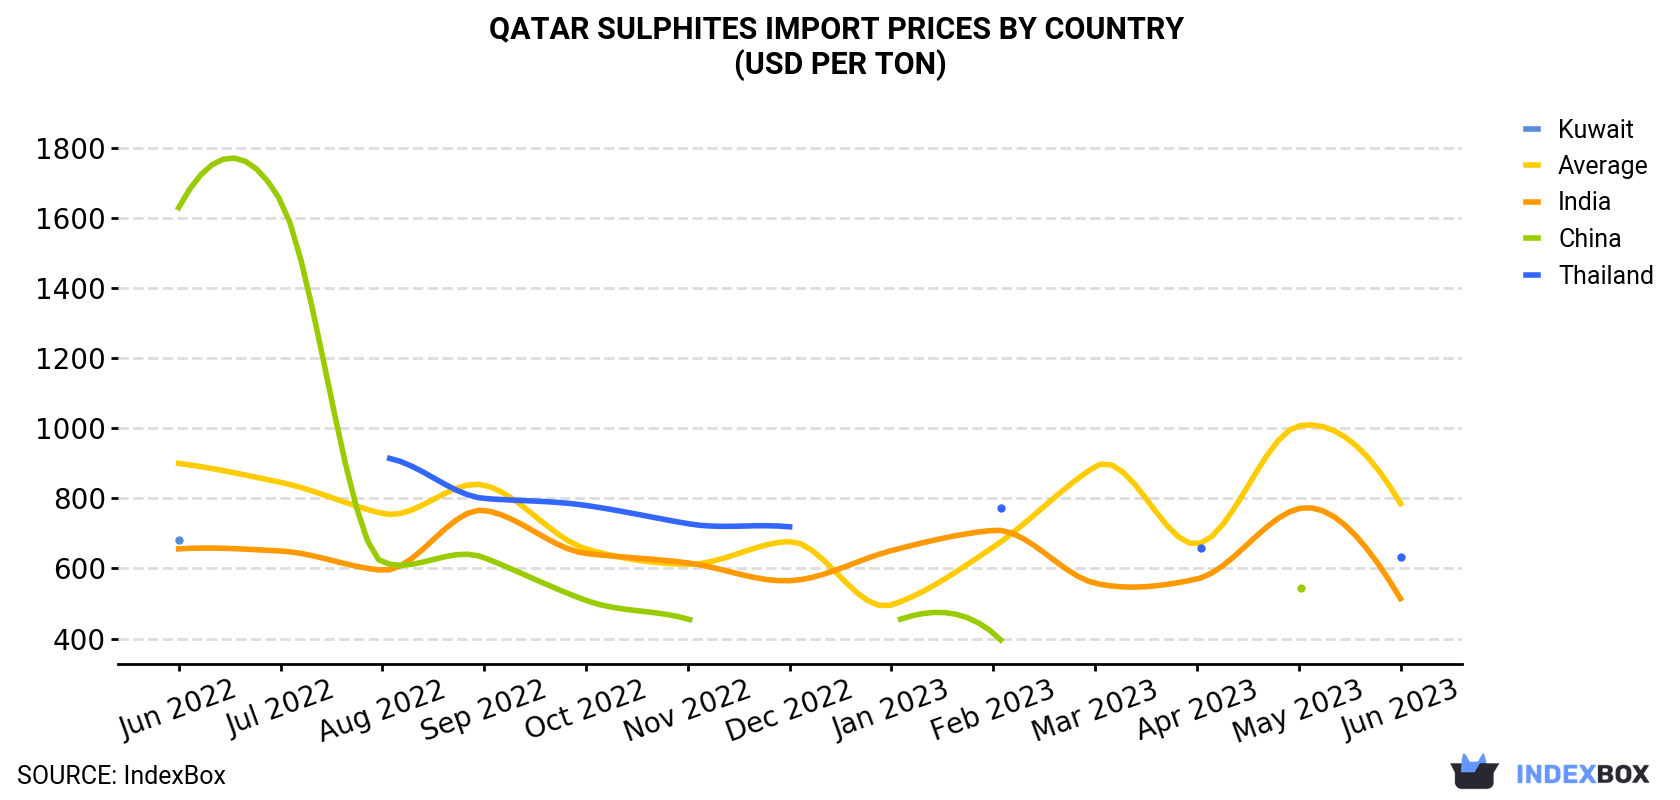 Qatar Sulphites Import Prices By Country (USD Per Ton)